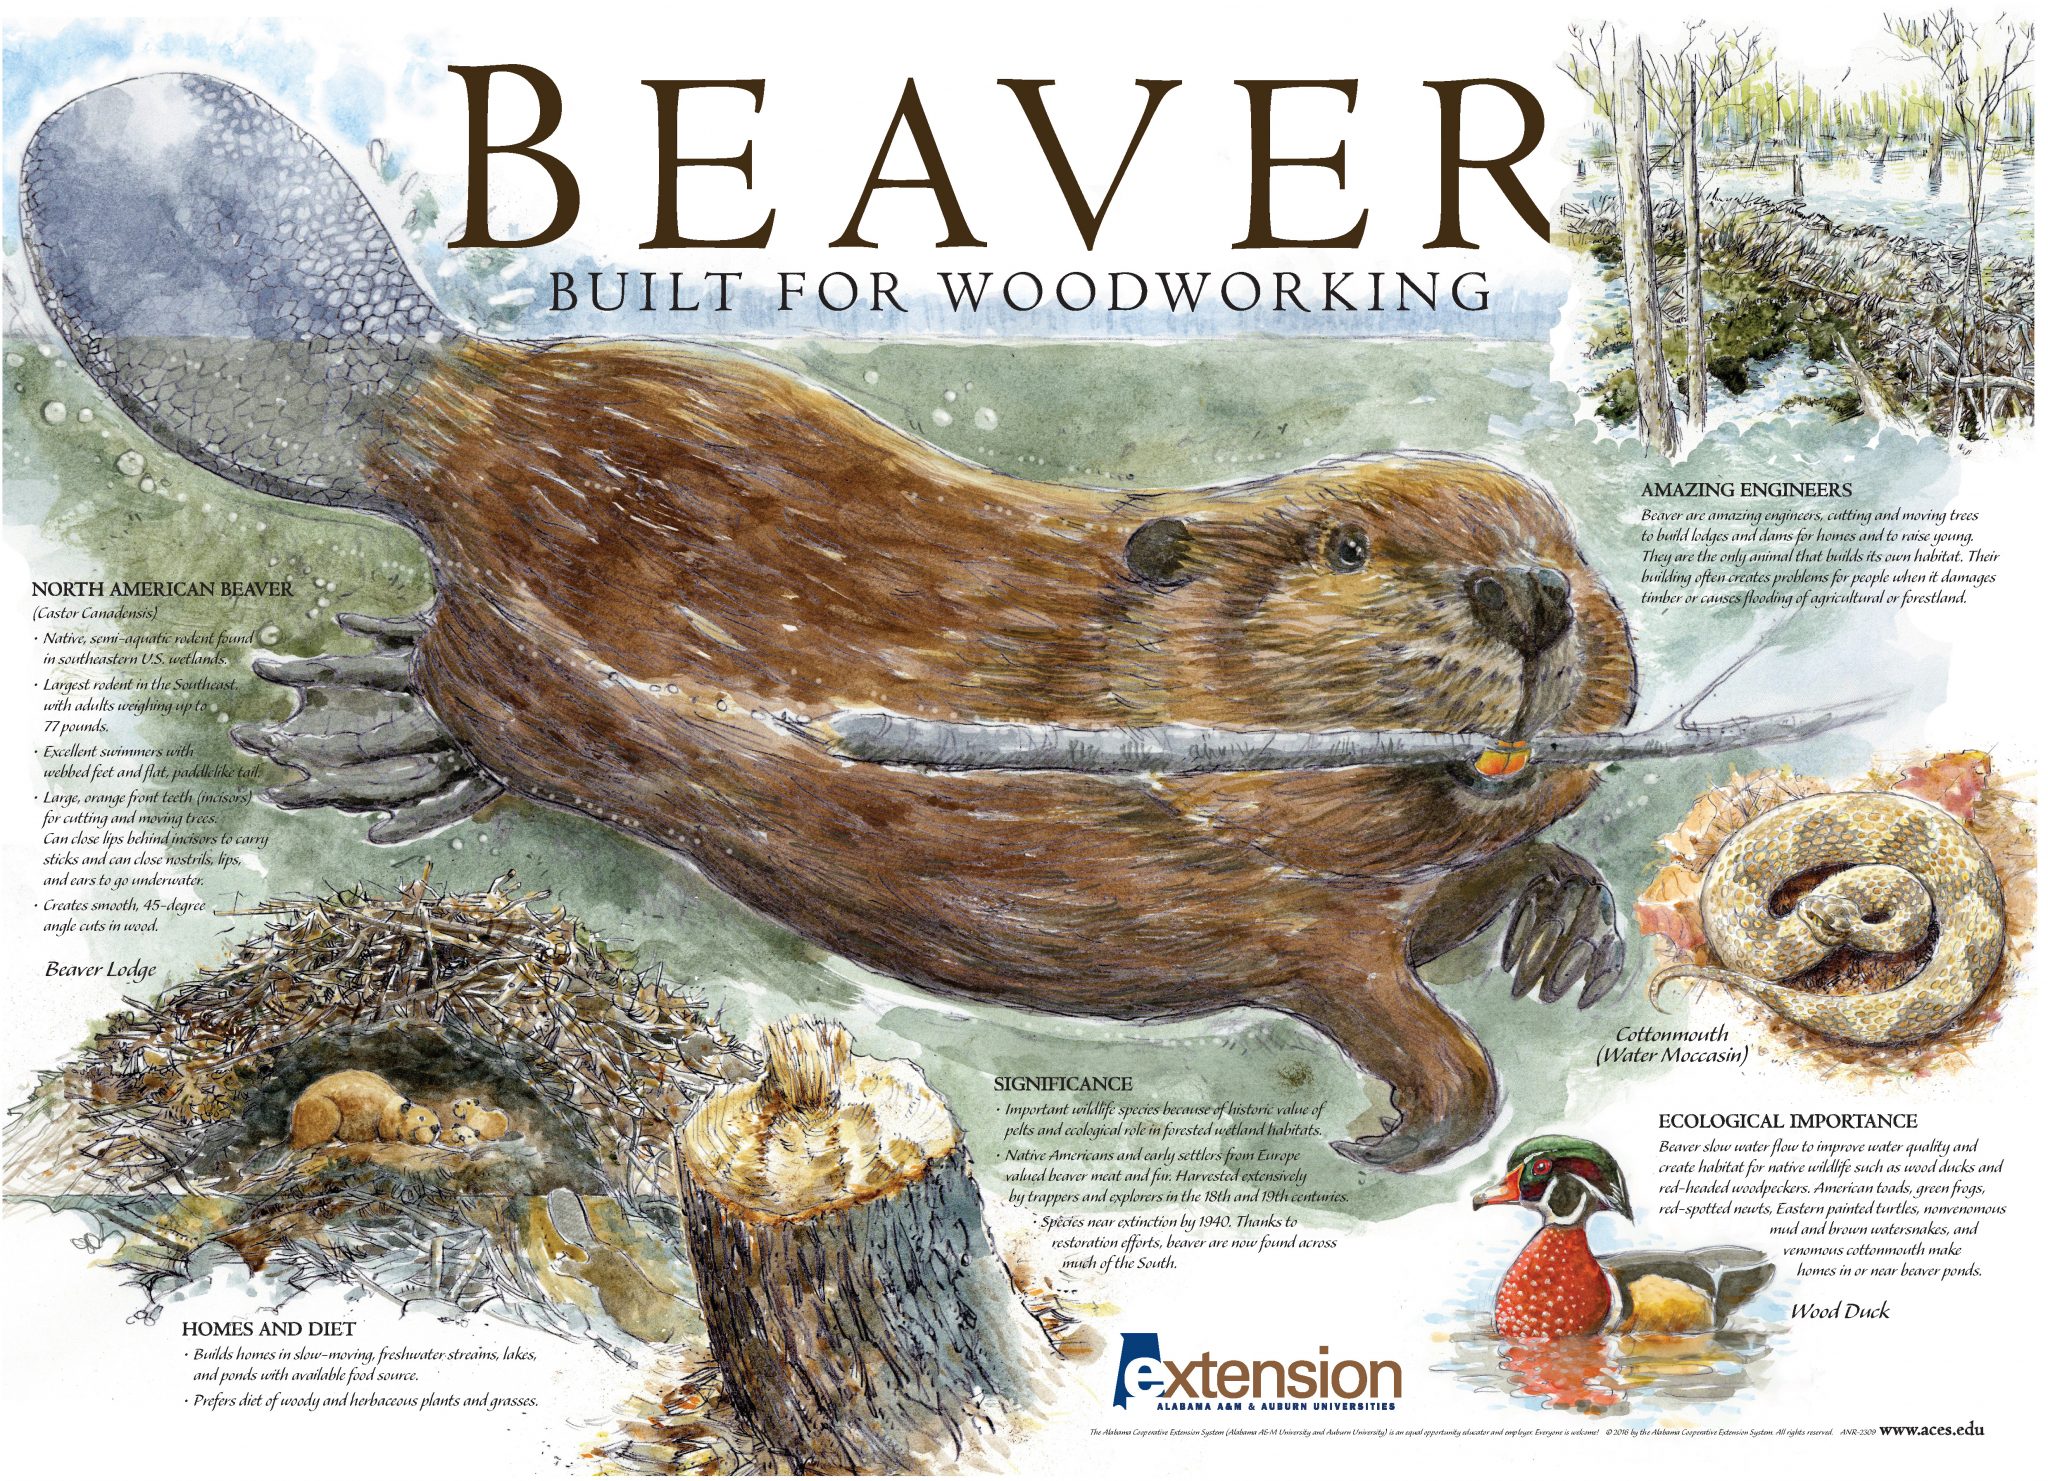 Beaver Built for Working - Alabama Cooperative Extension System